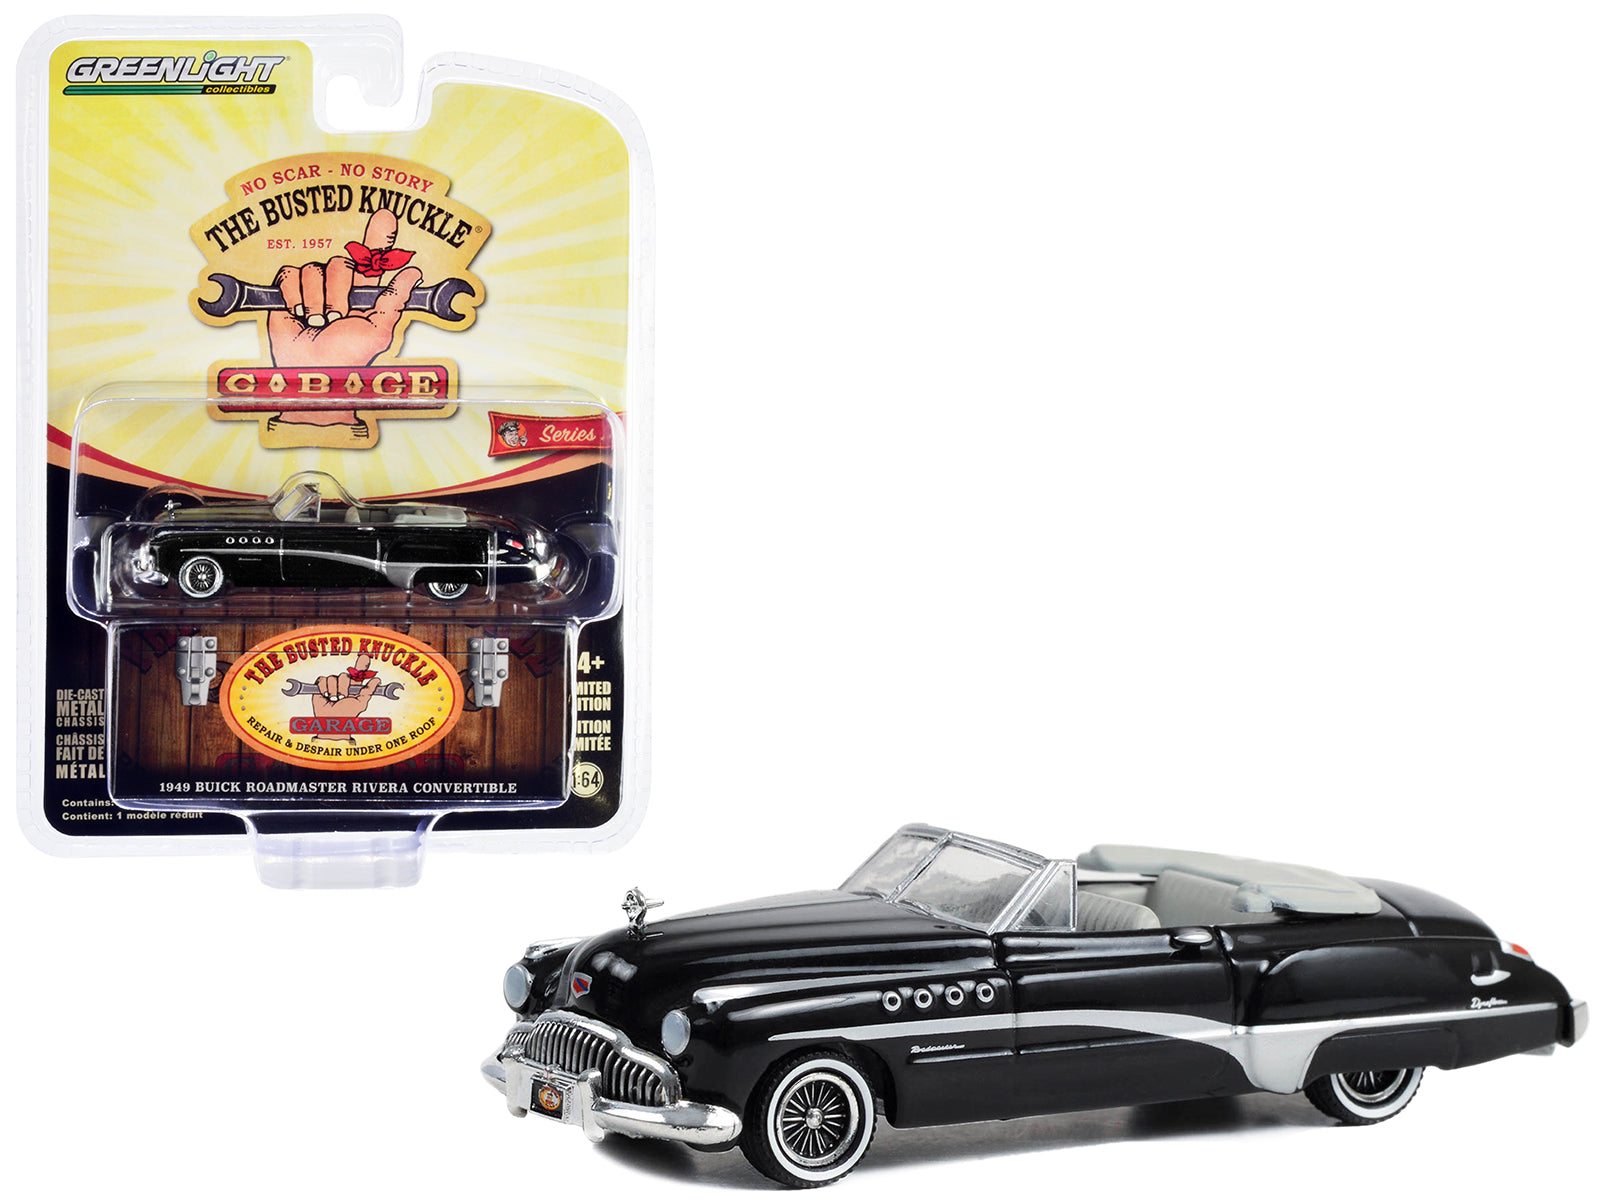 1949 buick roadmaster rivera busted knuckle garage car 1/64 diecast model